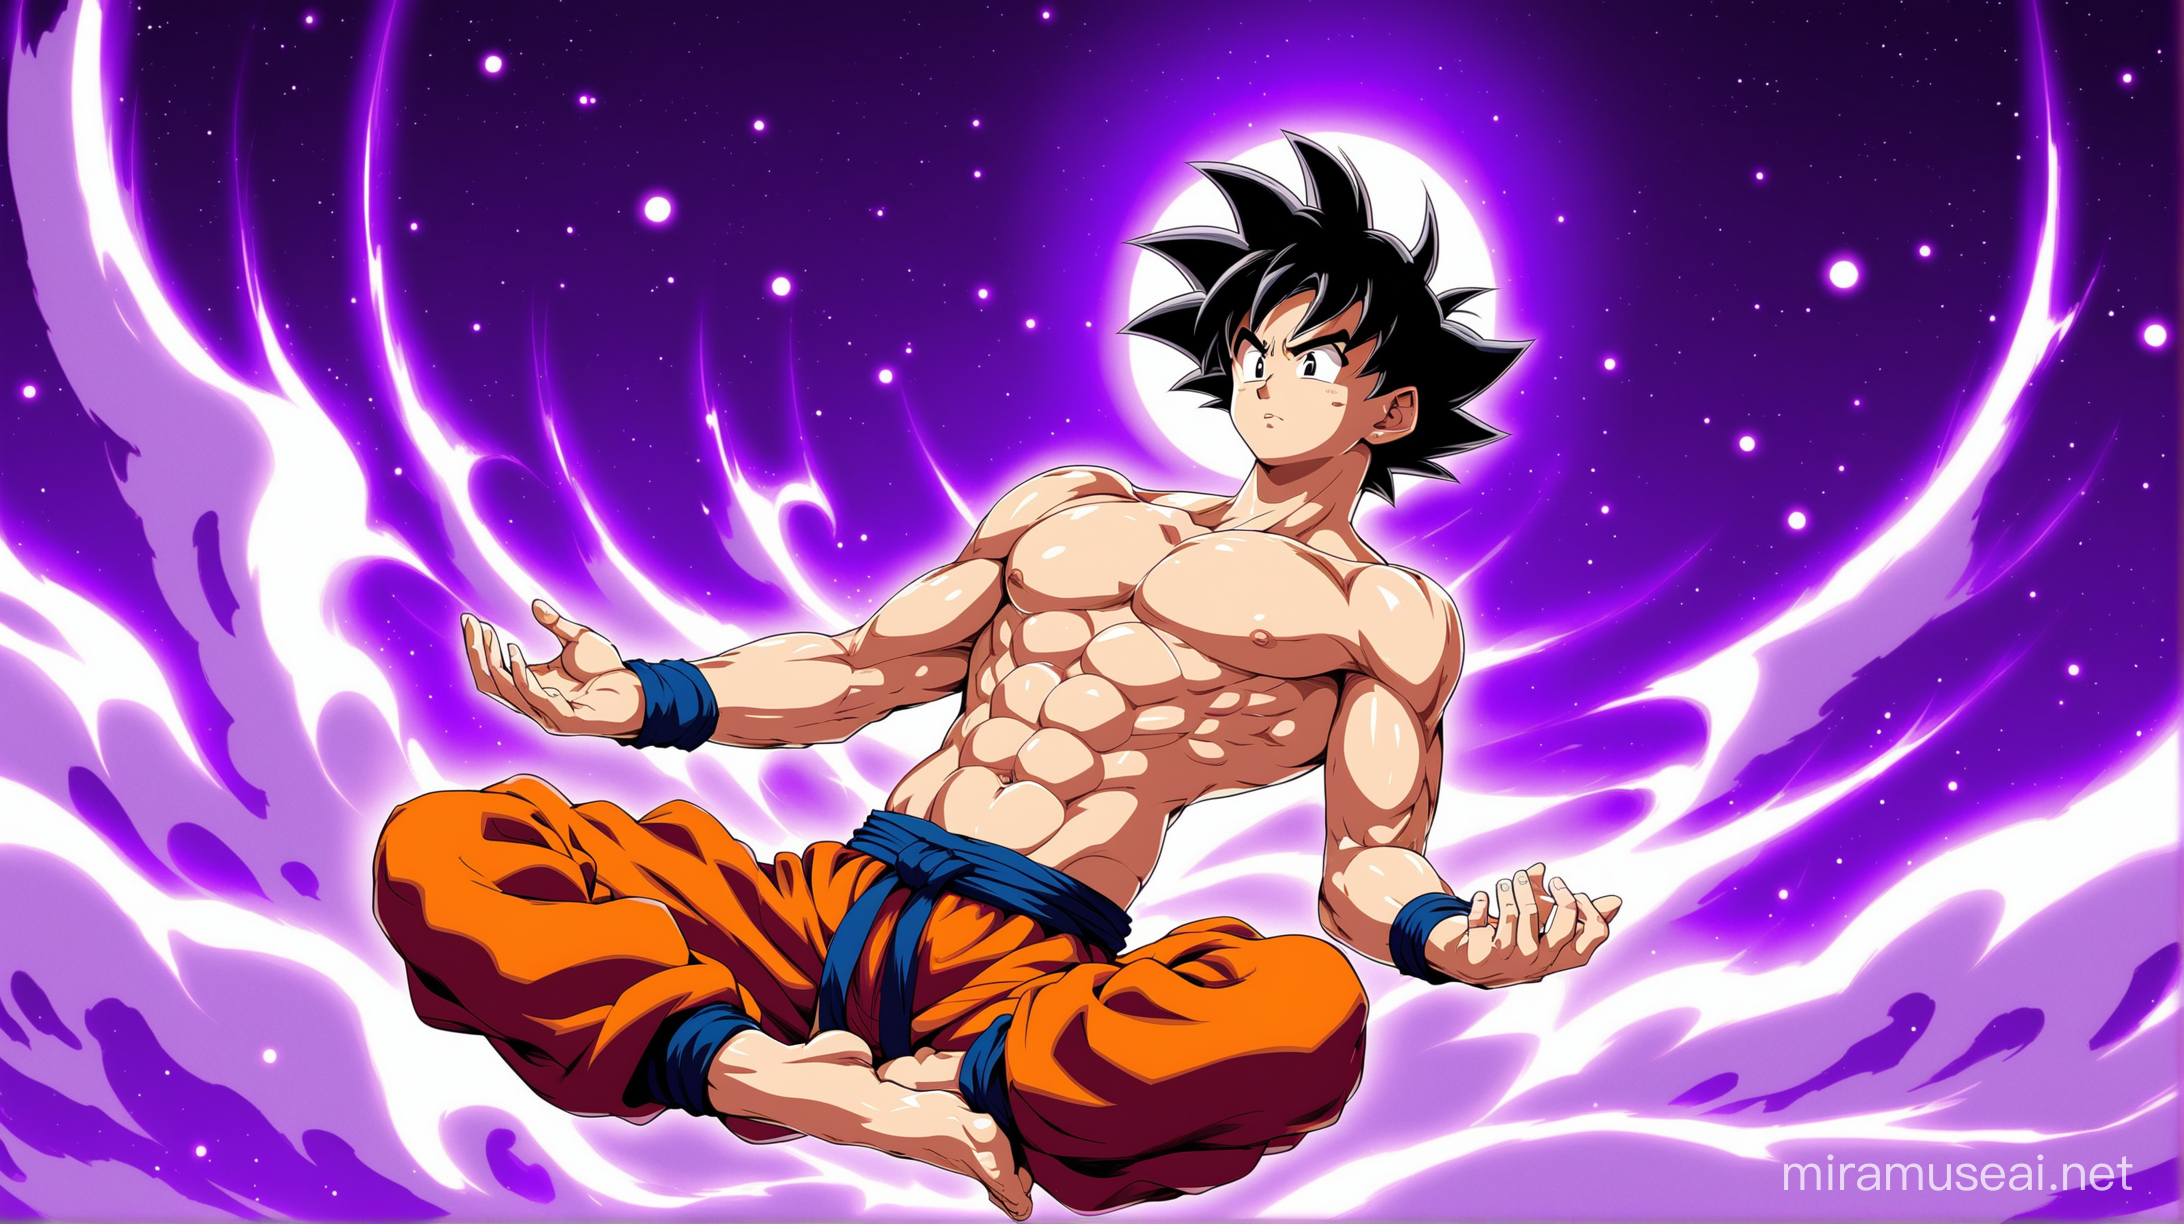 Goku meditating and floating in a purple backgroundm he's shirtless and lean